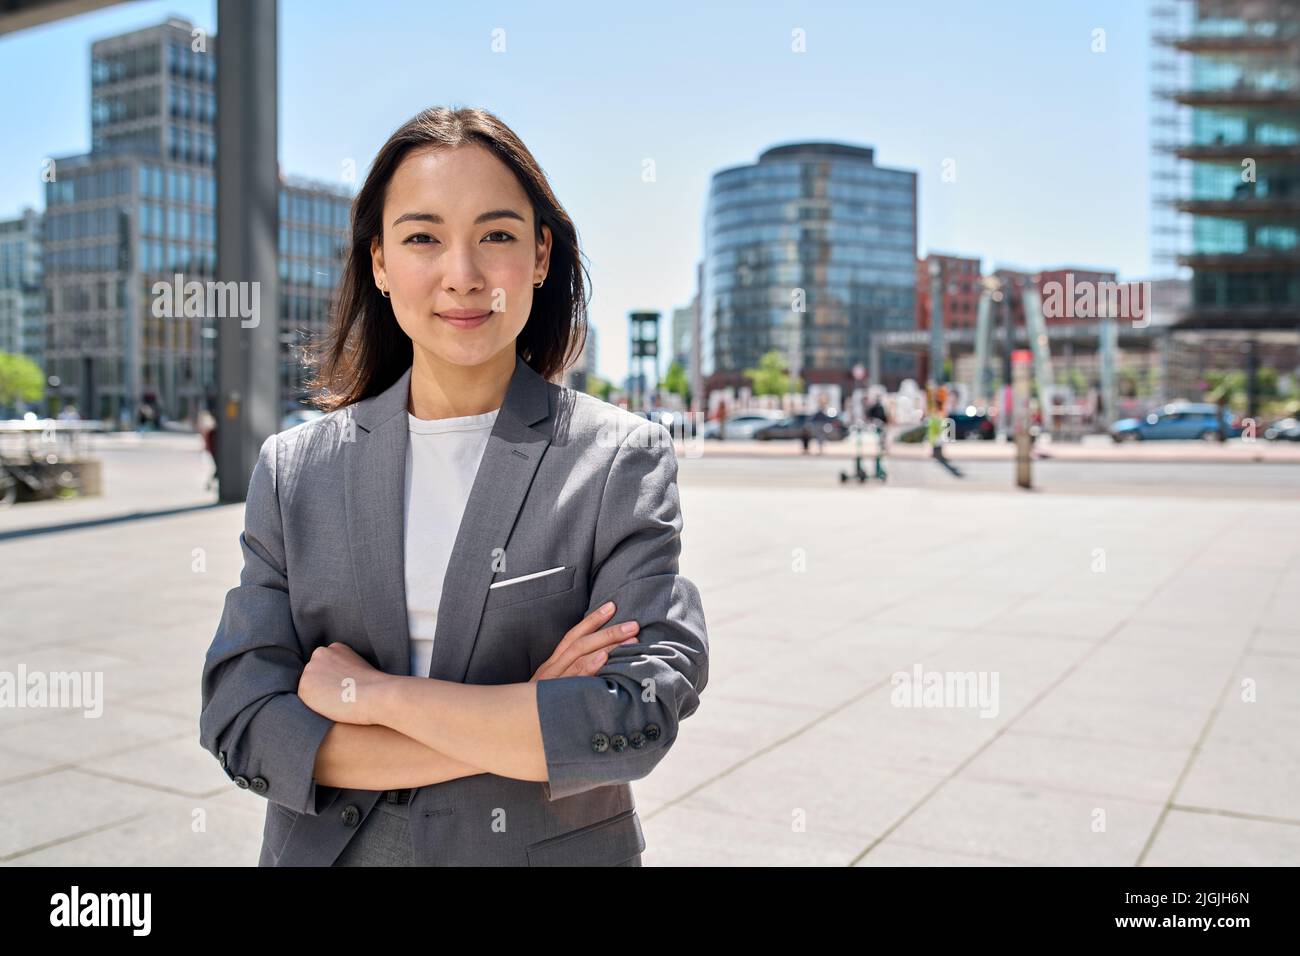 Young confident smiling Asian business woman standing on city street, portrait. Stock Photo